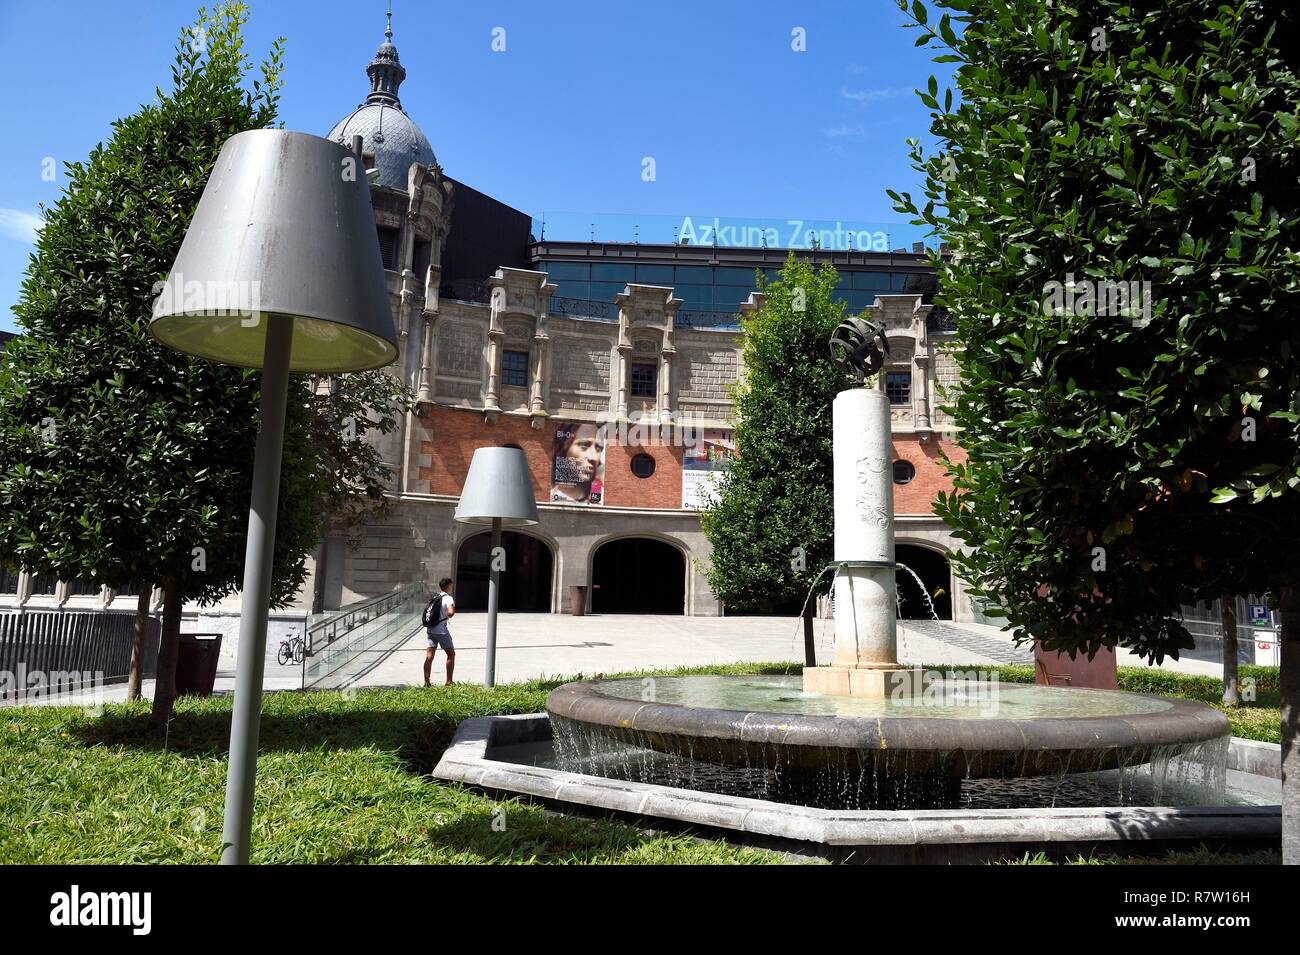 Spain, Basque Country, Biscay Province, Bilbao, Azkuna Zentroa, former municipal wine warehouse called Alhóndiga dating from 1909 completely restructured by Philippe Starck to host a cultural and leisure center Stock Photo